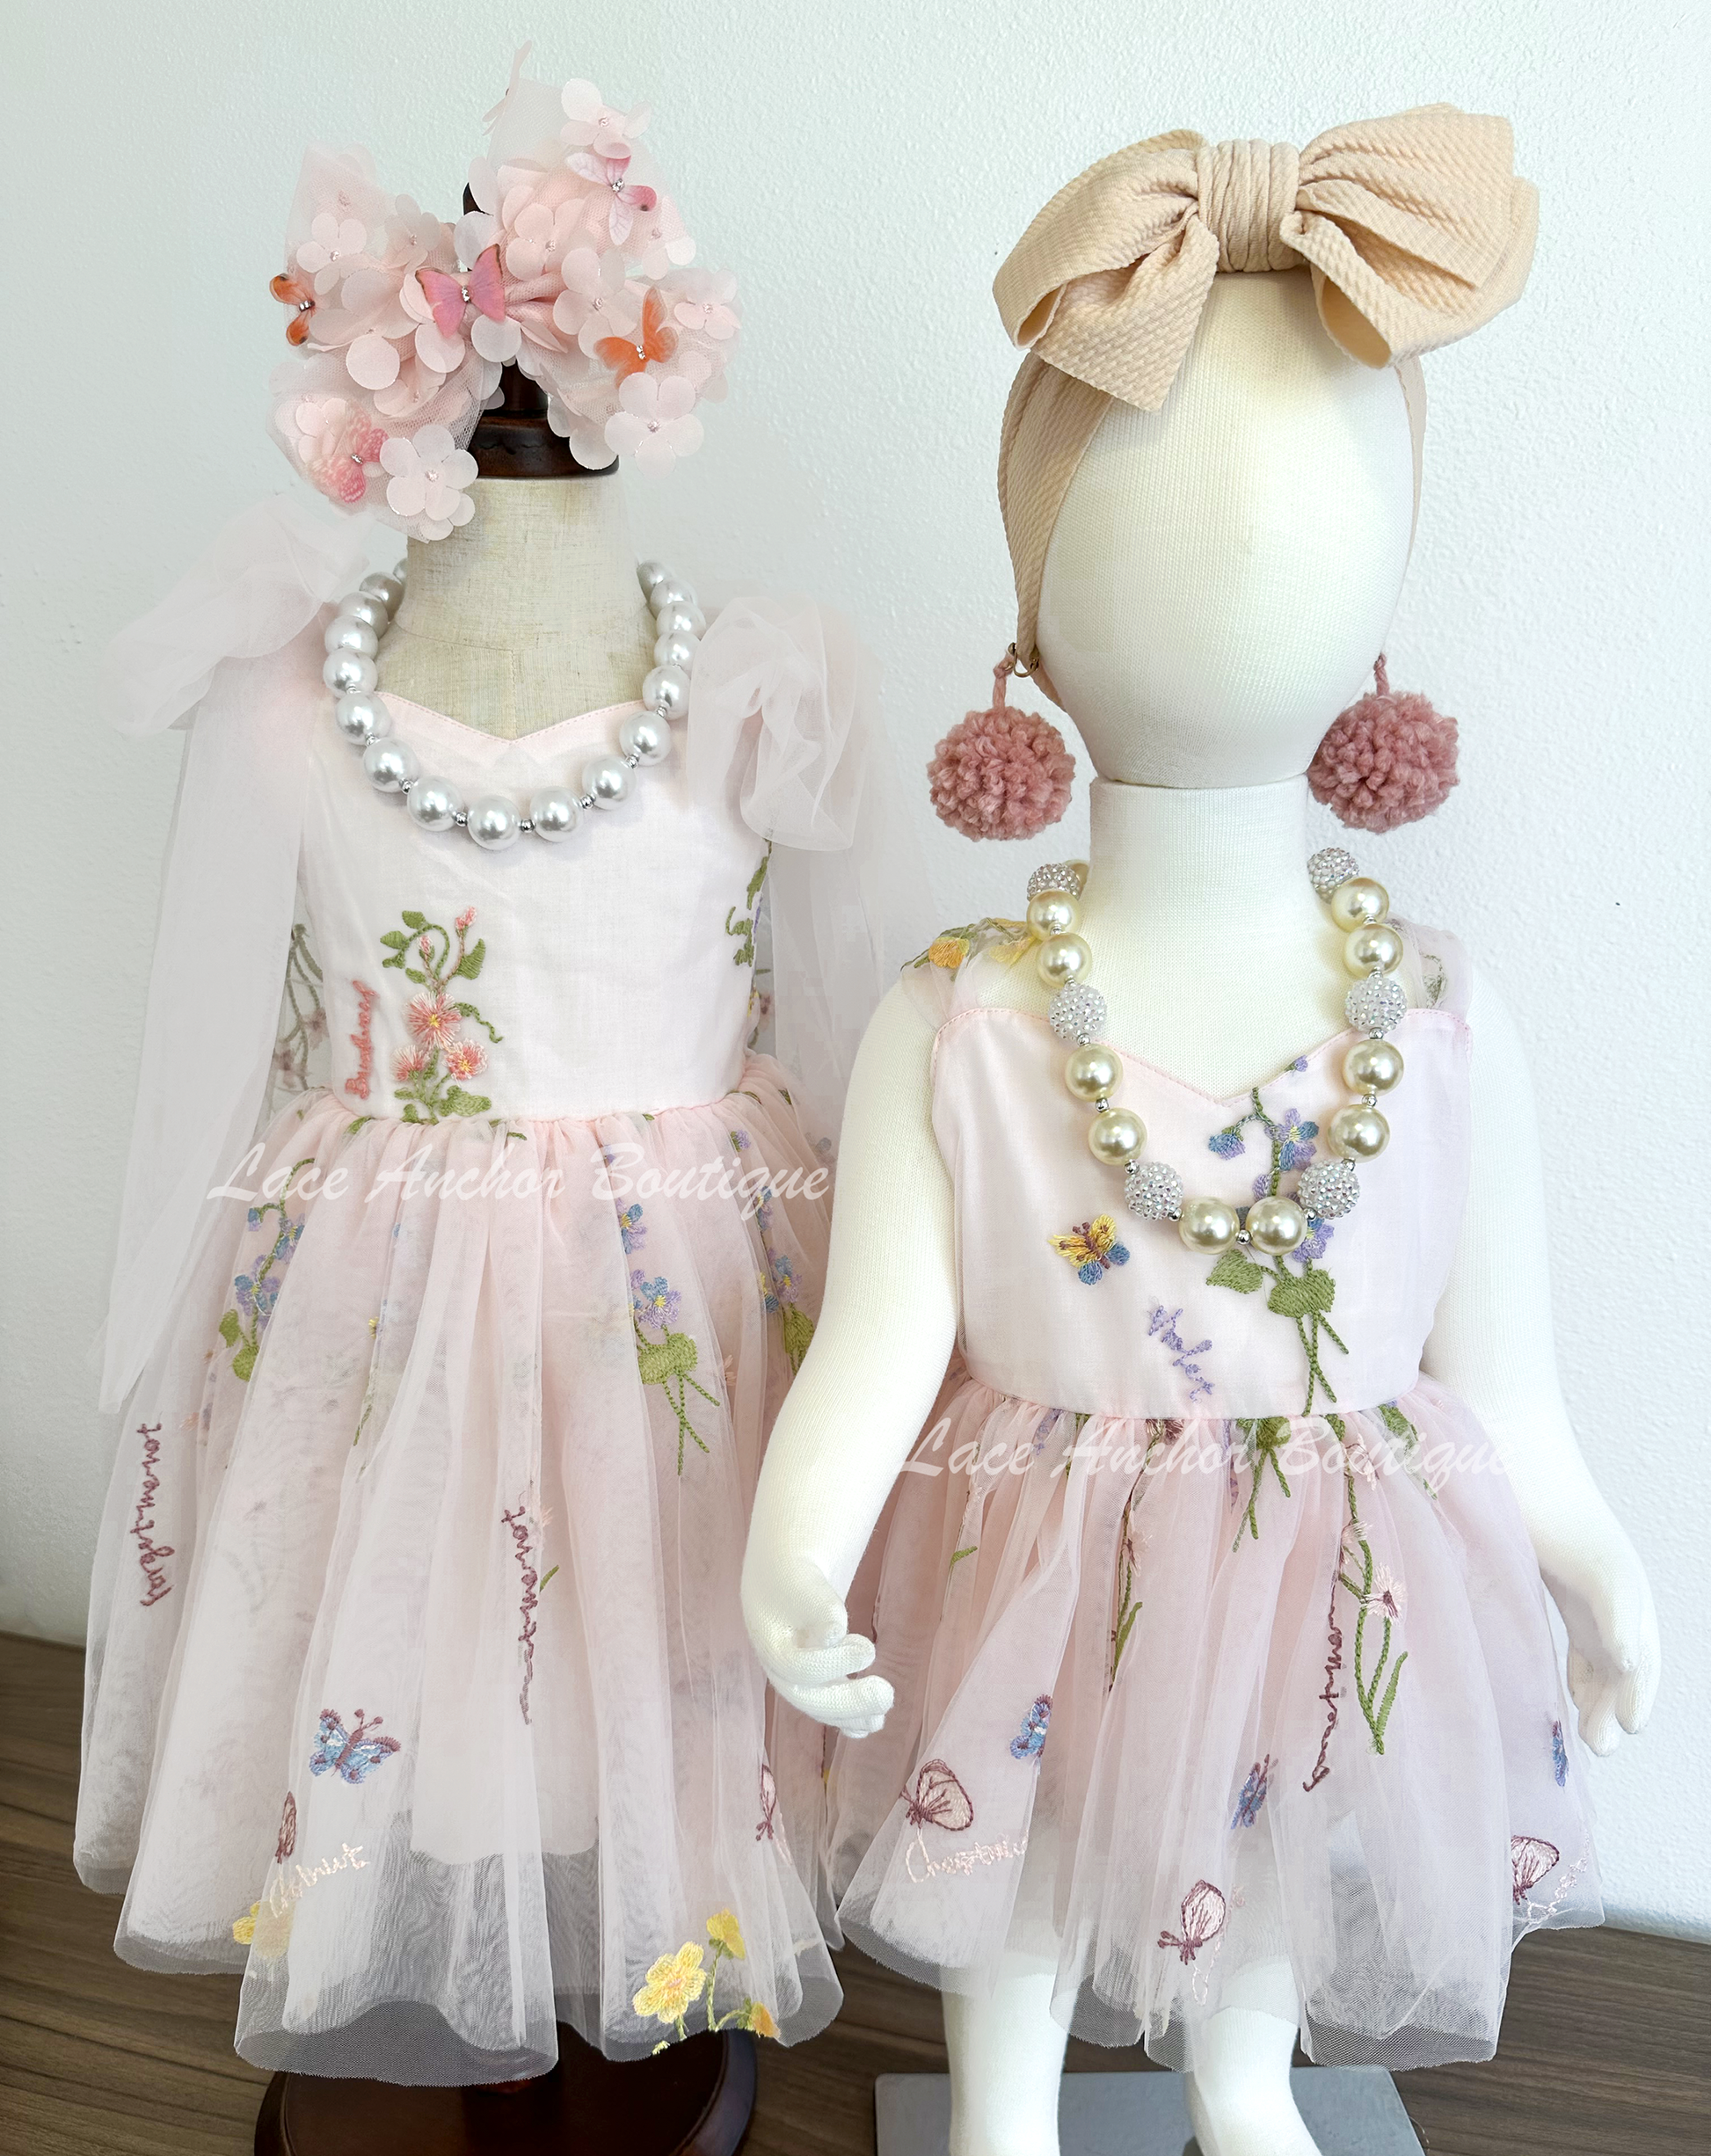 toddler youth puffy tied shoulder flower girl dress with large tied bow tied at waist. Baby girls romper with tied back fluffy bow. Outfits in light blush pink with embroidered floral print.